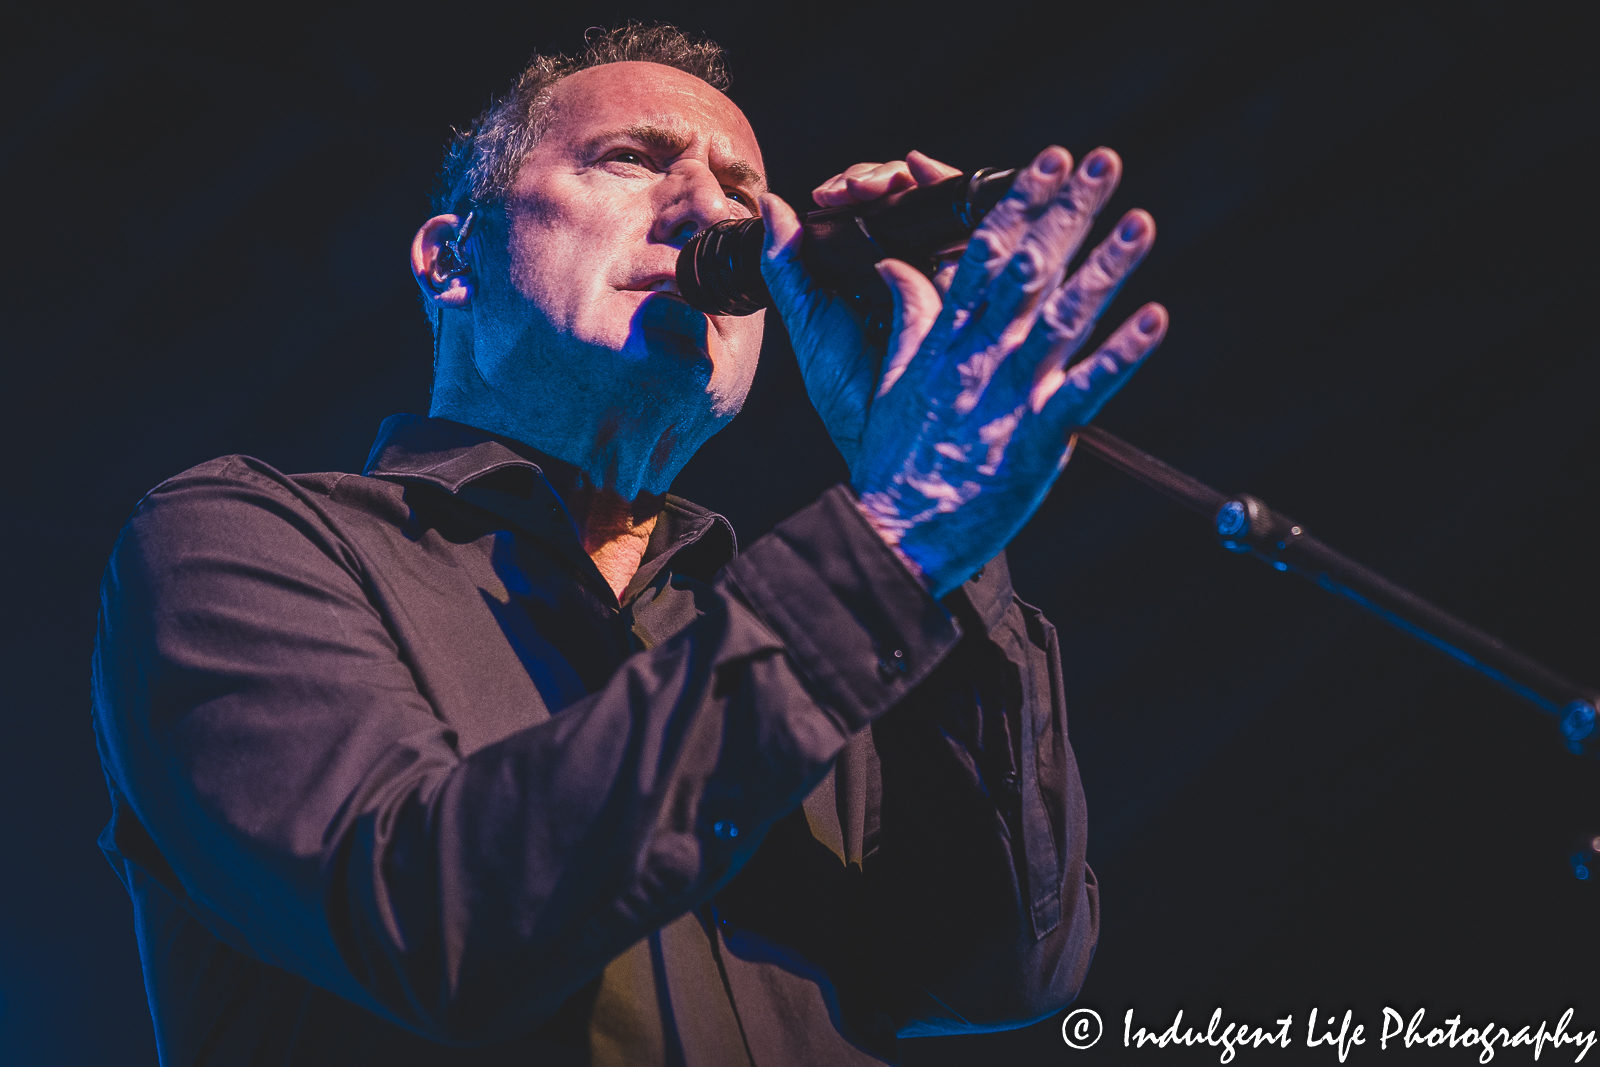 OMD lead singer Andy McCluskey singing live at The Truman in downtown Kansas City, MO on May 8, 2022.